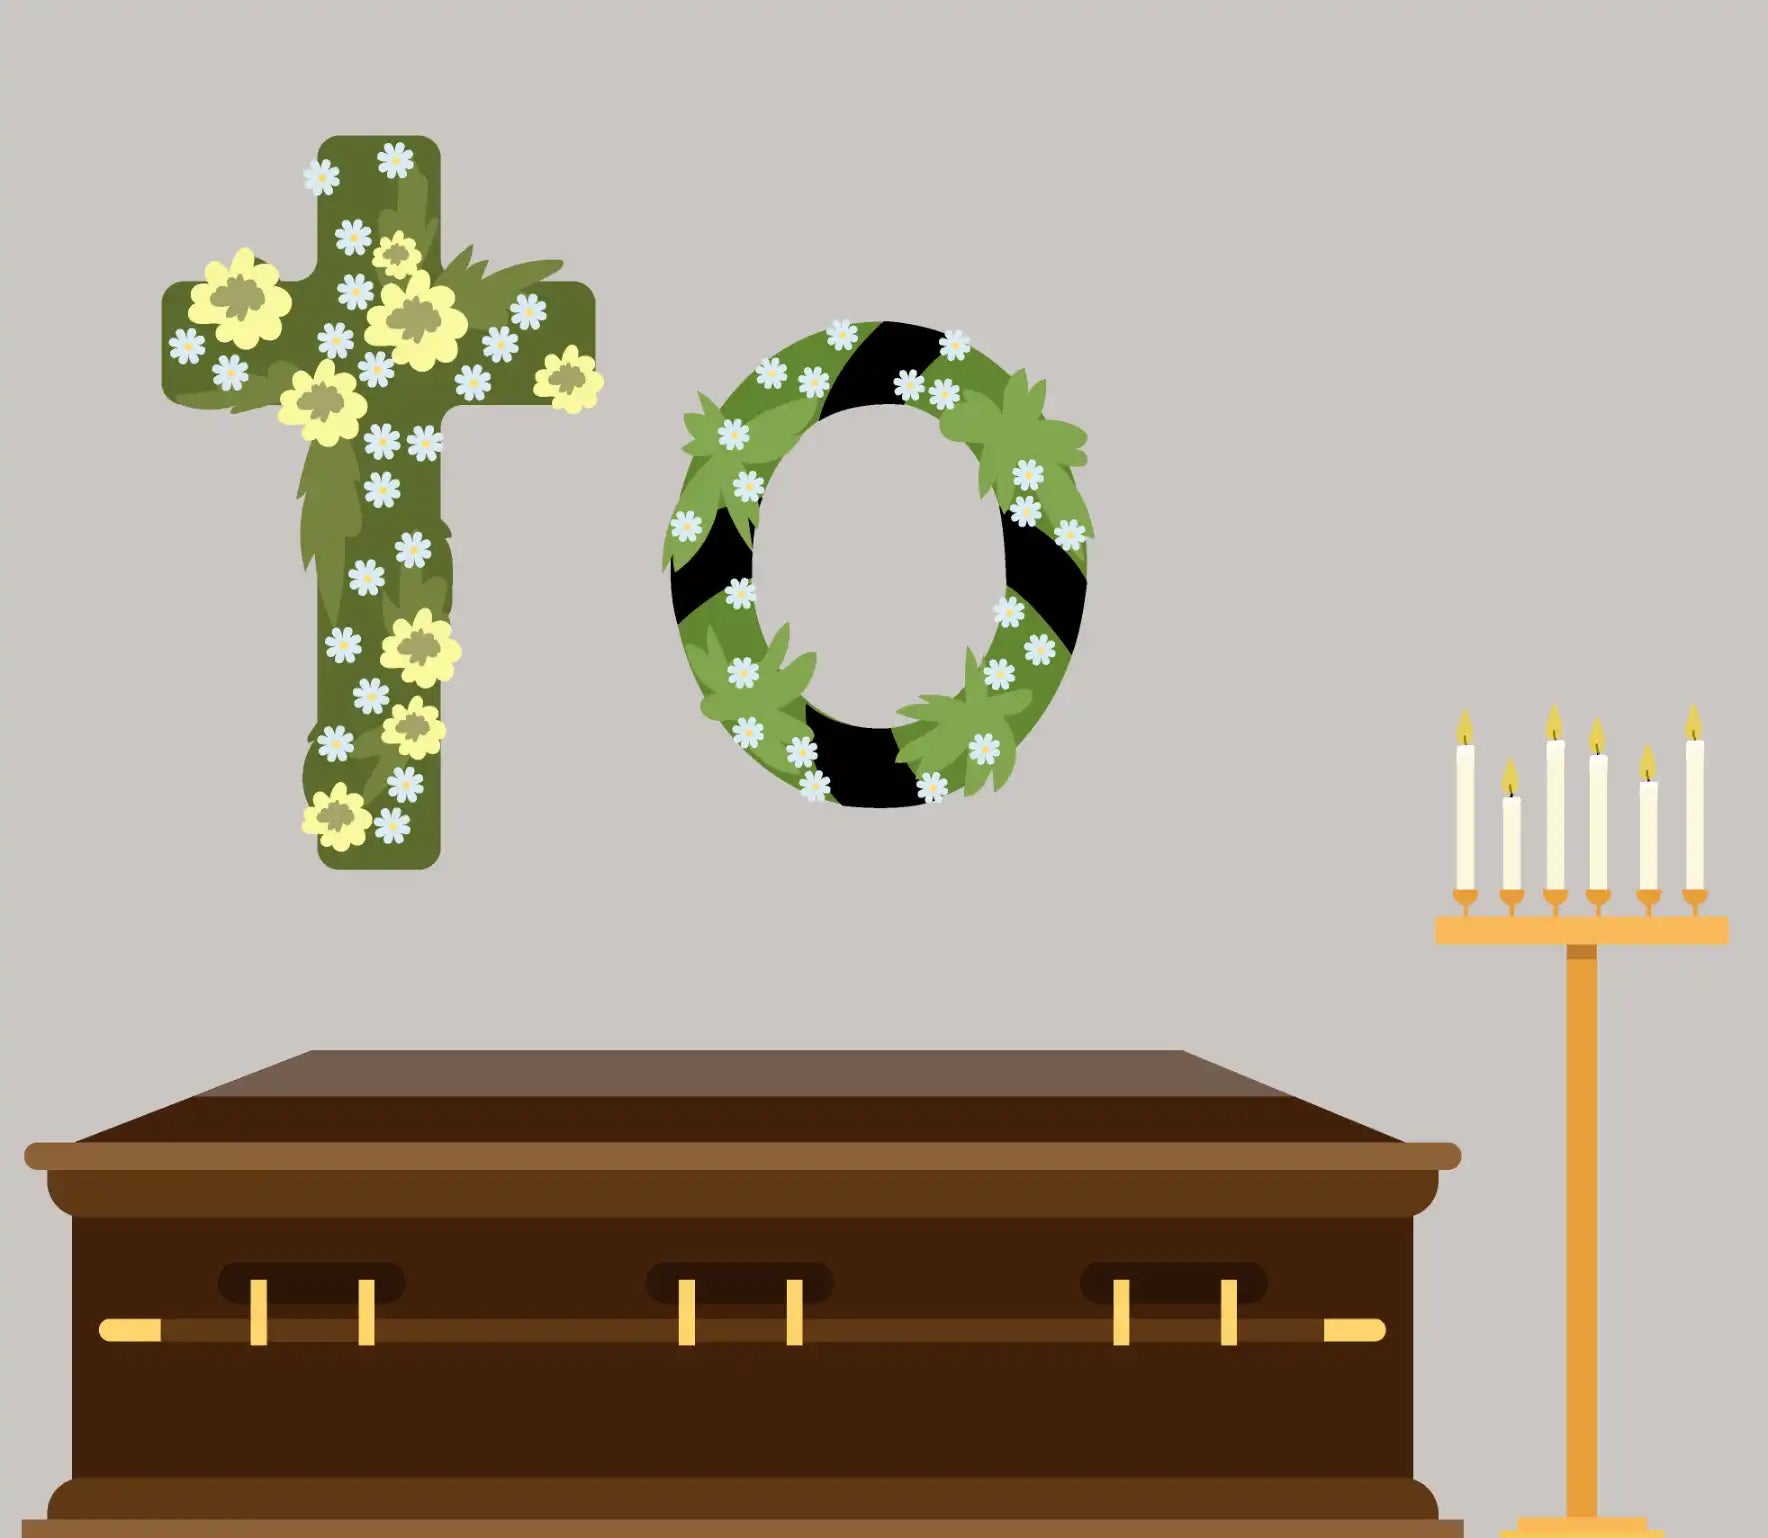 How To Decide Between Burial And Cremation